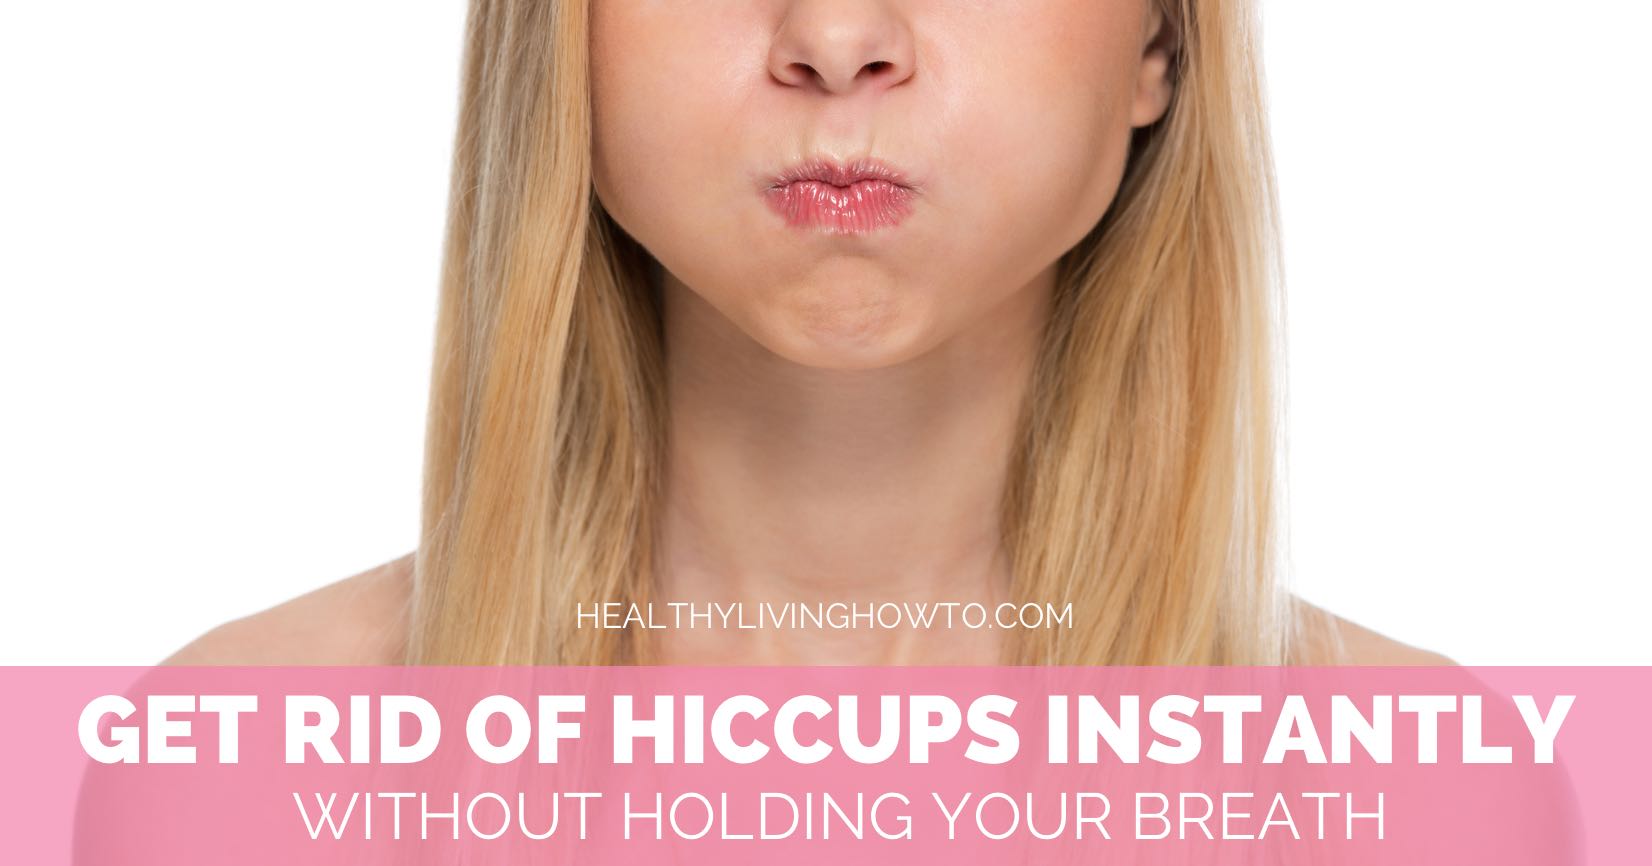 How To Get Rid of Hiccups Instantly | healthylivinghowto.com